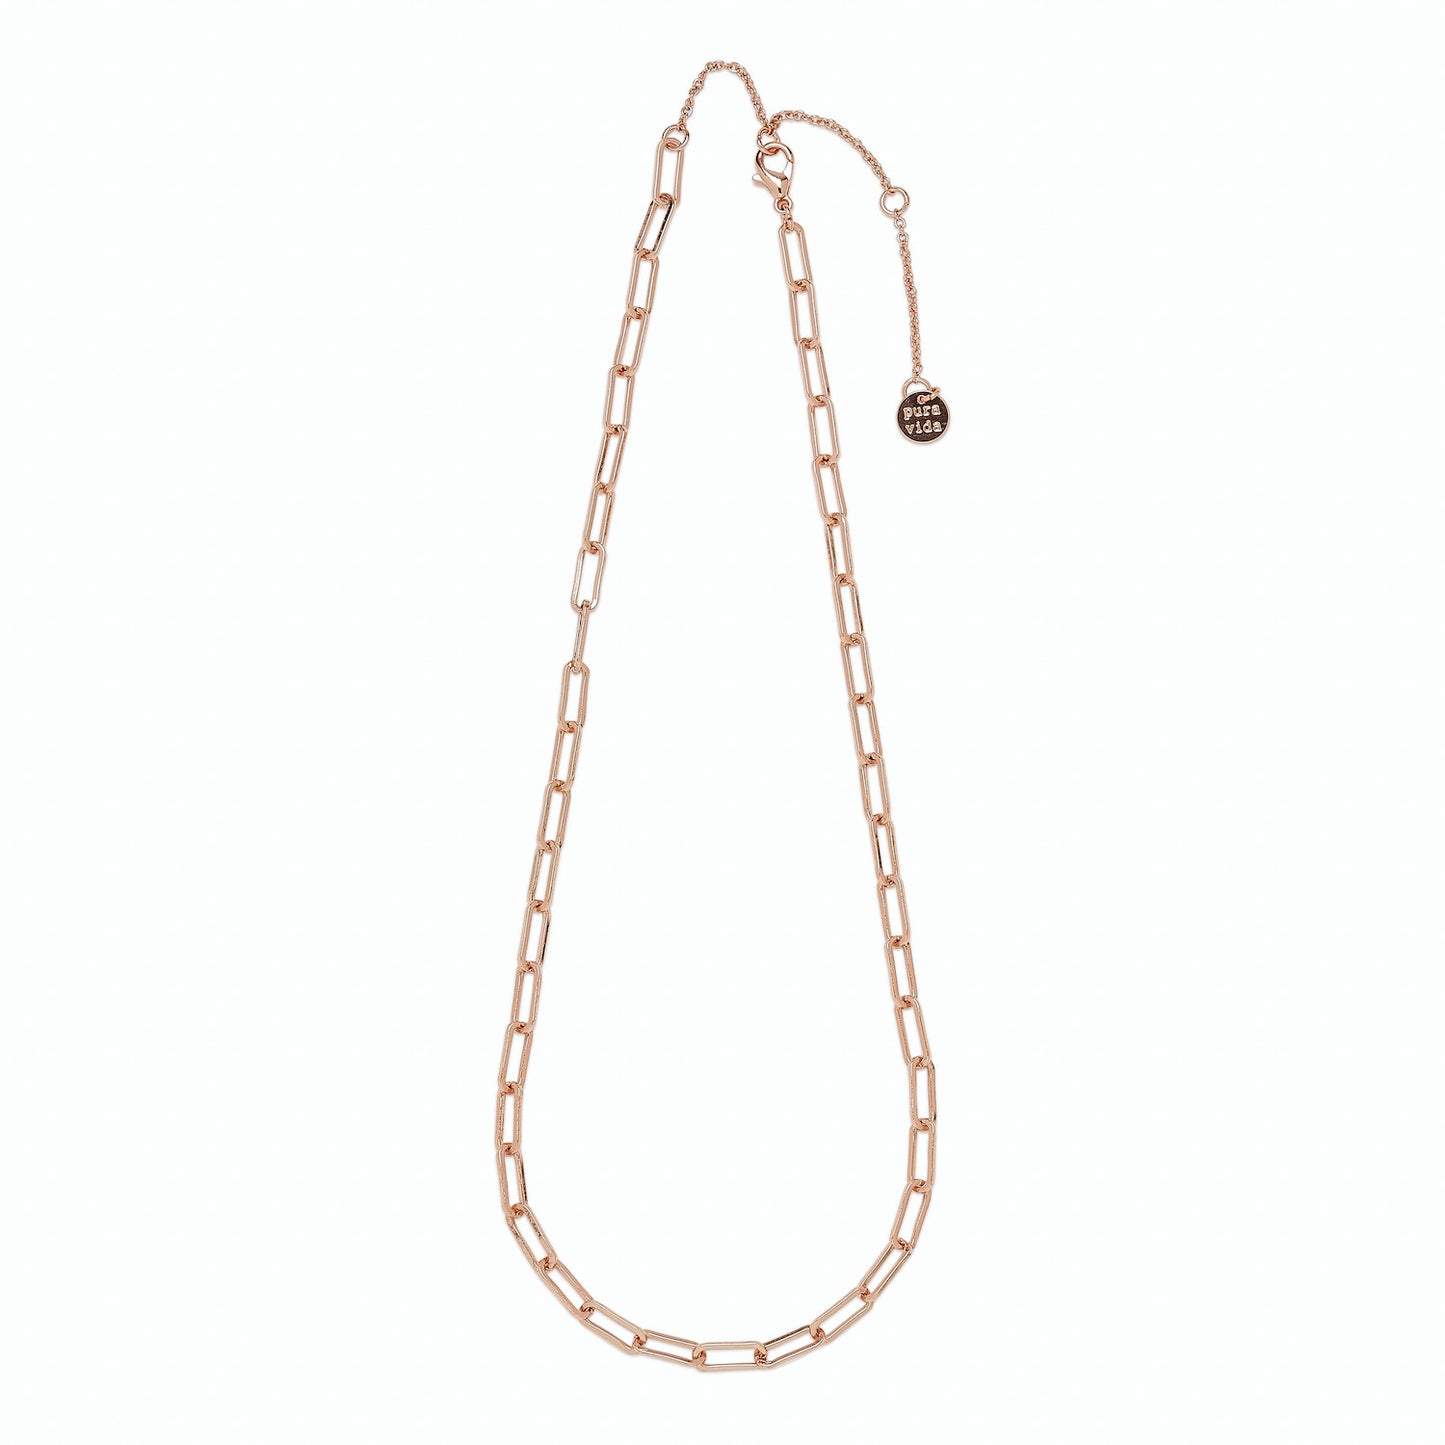 PURA VIDA SIMPLE PAPERCLIP NECKLACE ROSE GOLD NEW